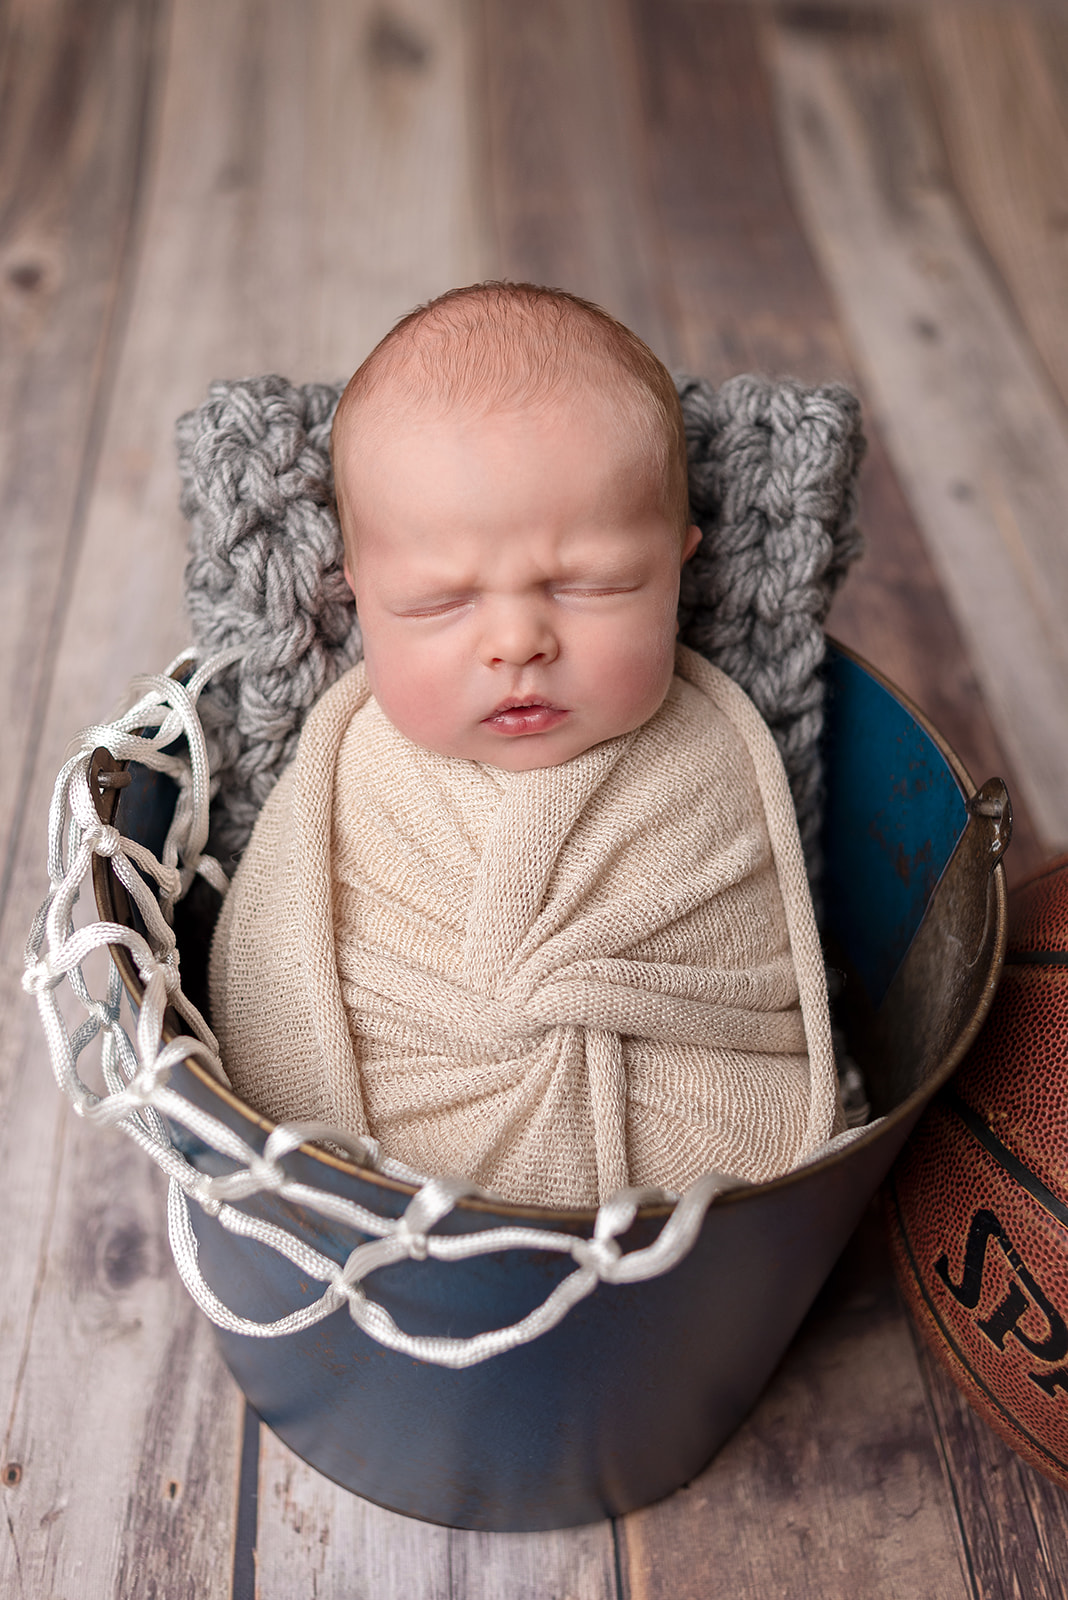 A newborn boy wrapped up in a cream knit swaddle sleeping in a bucket and basketball netting with a basketball nearby